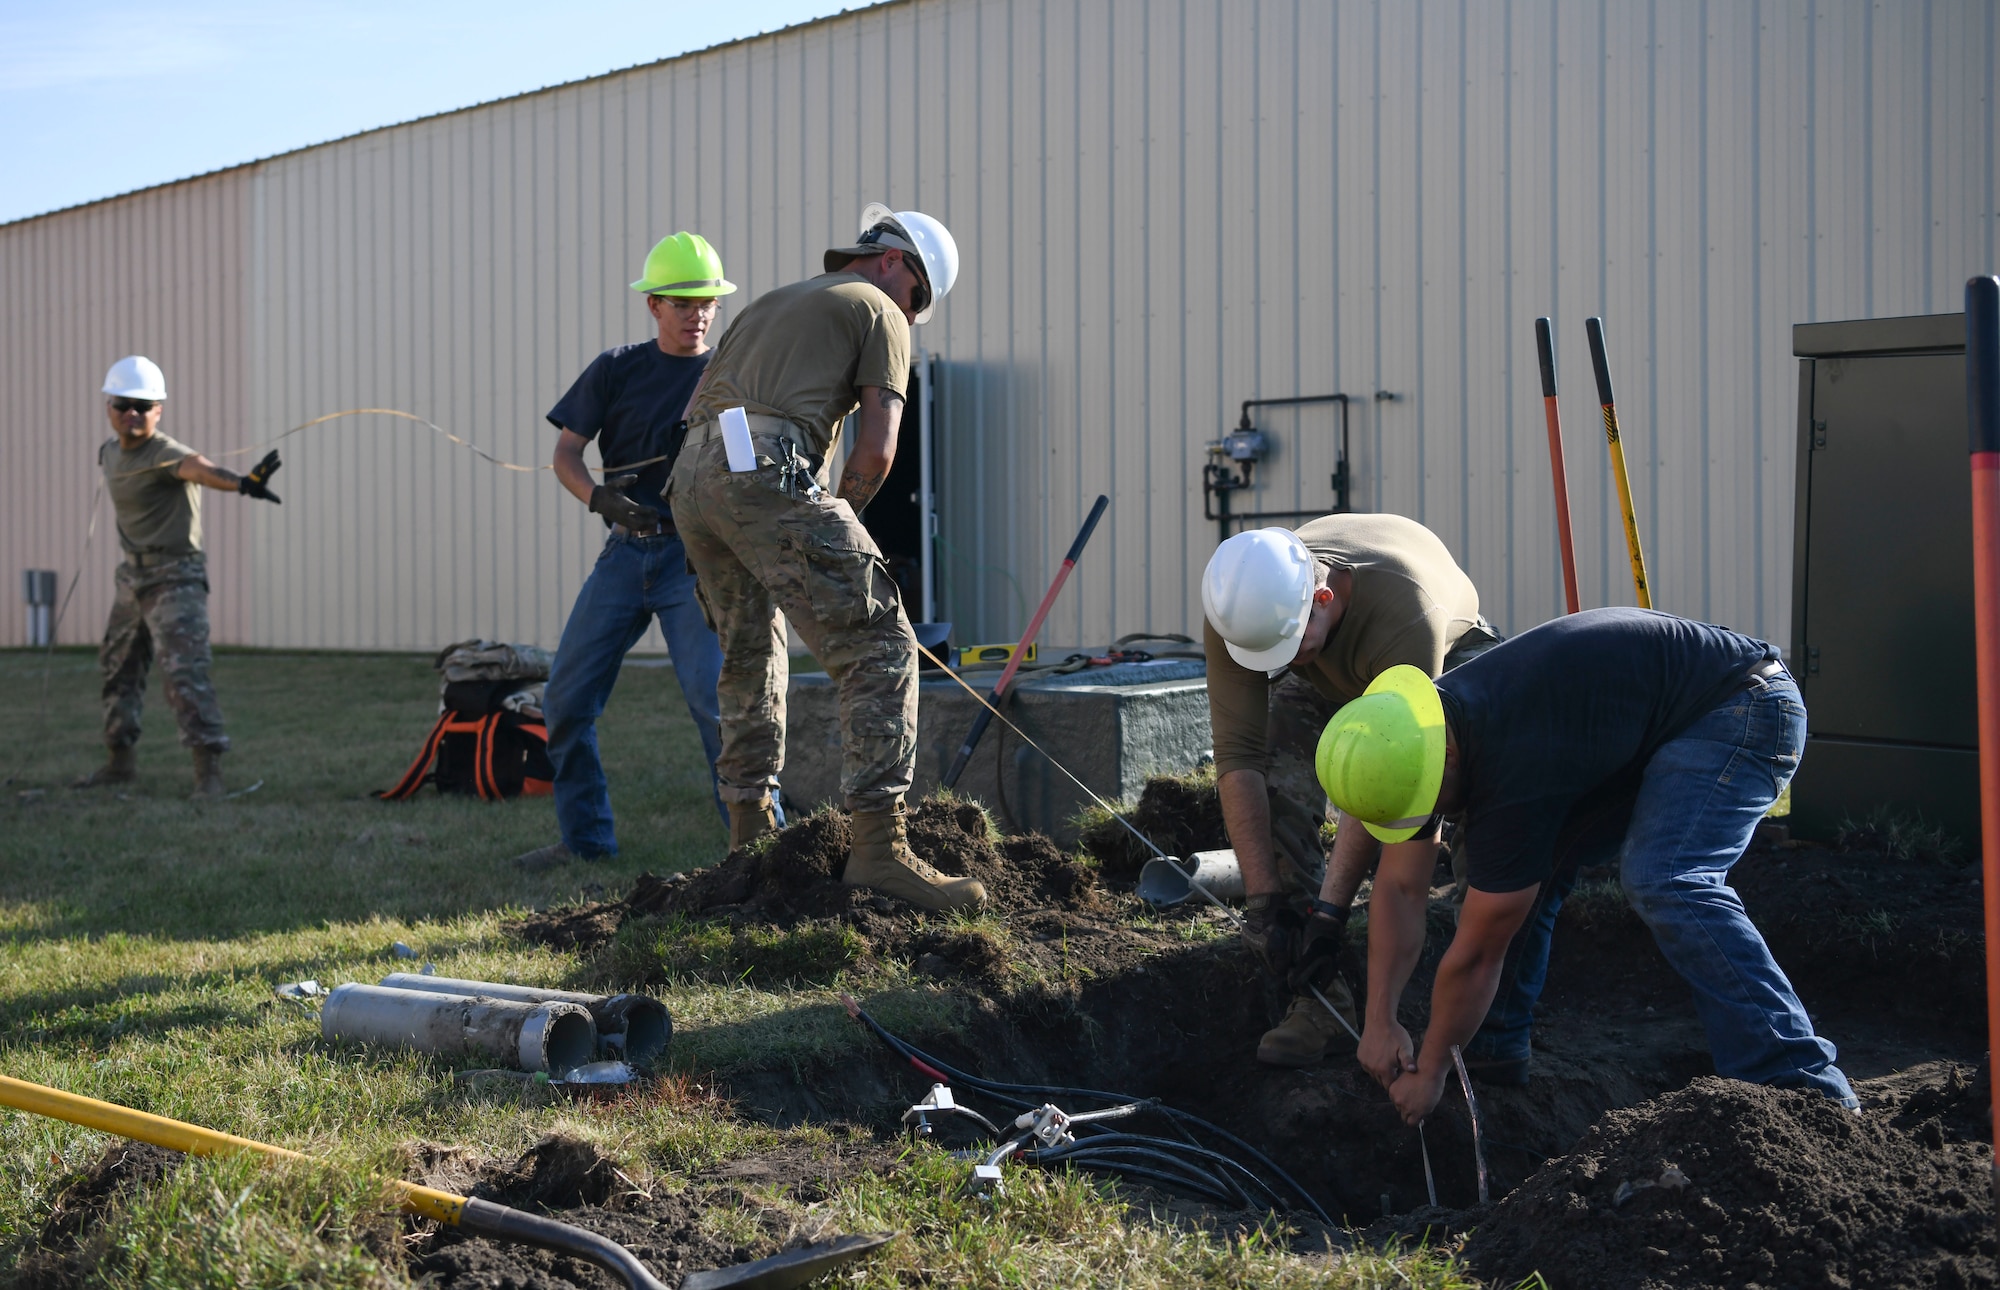 Airmen from the 319th Civil Engineer Squadron and Nodak Electric Cooperative contractors replace high-voltage electrical wiring Aug. 23, 2022, on Grand Forks Air Force Base, North Dakota. The 319th CES used the installation project as an opportunity to practice skills not used in day-to-day operations. (U.S. Air Force photo by Airman 1st Class Roxanne A. Belovarac)